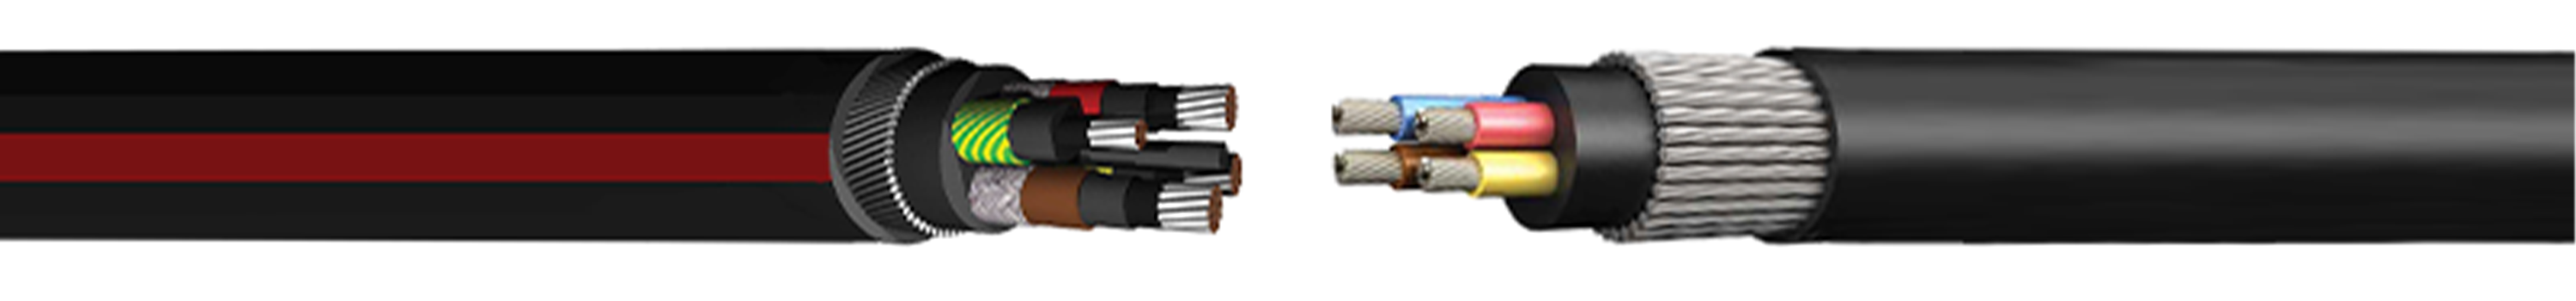 TYPE-621-MINING-CABLES-BS-6708